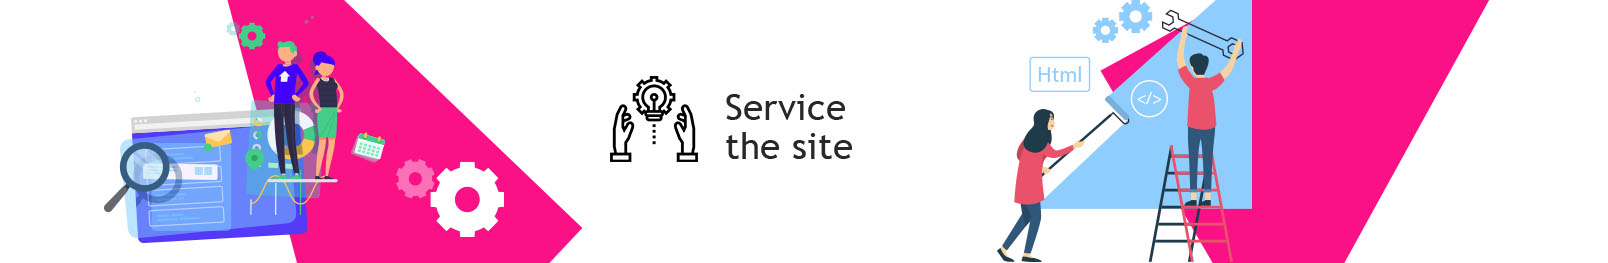 Site maintenance. High-quality service of your site.